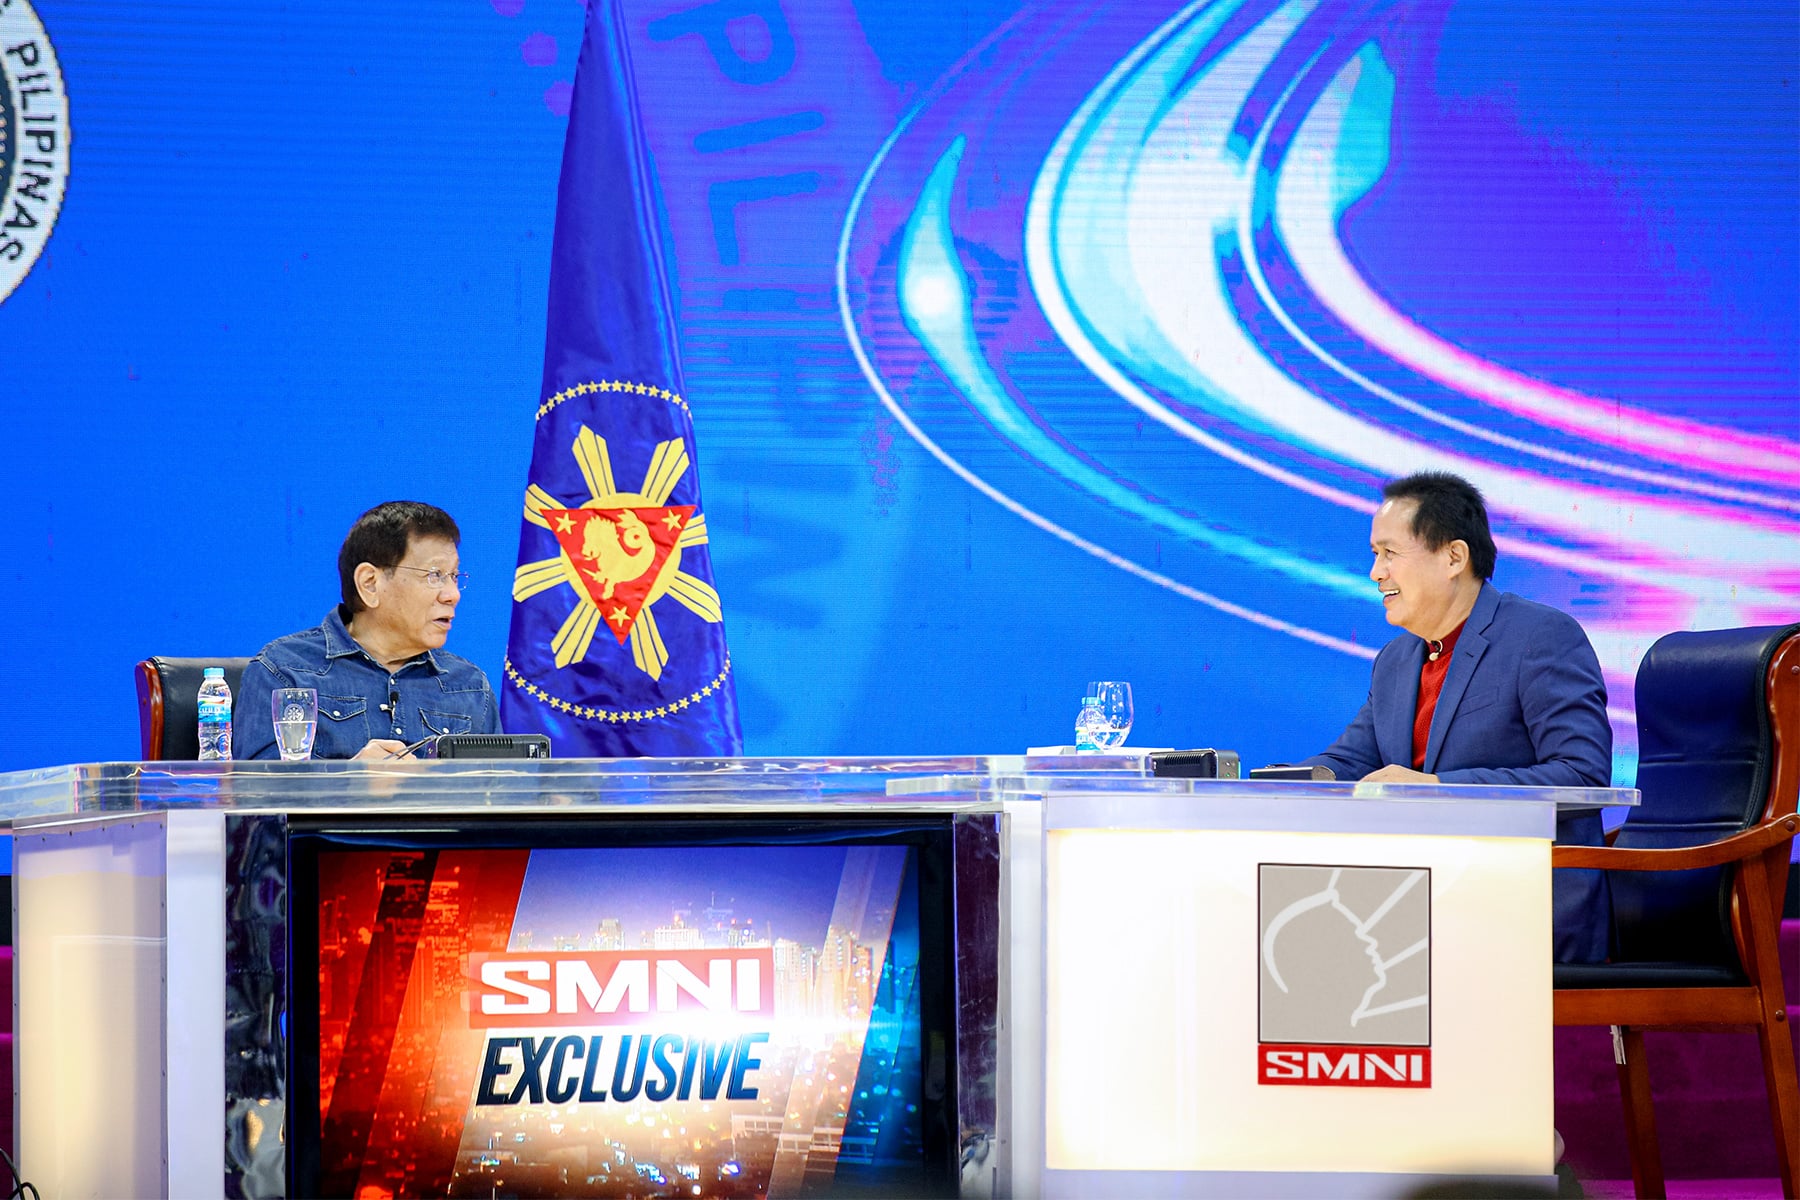 PRRD’s Exit Interview on SMNI Exclusive